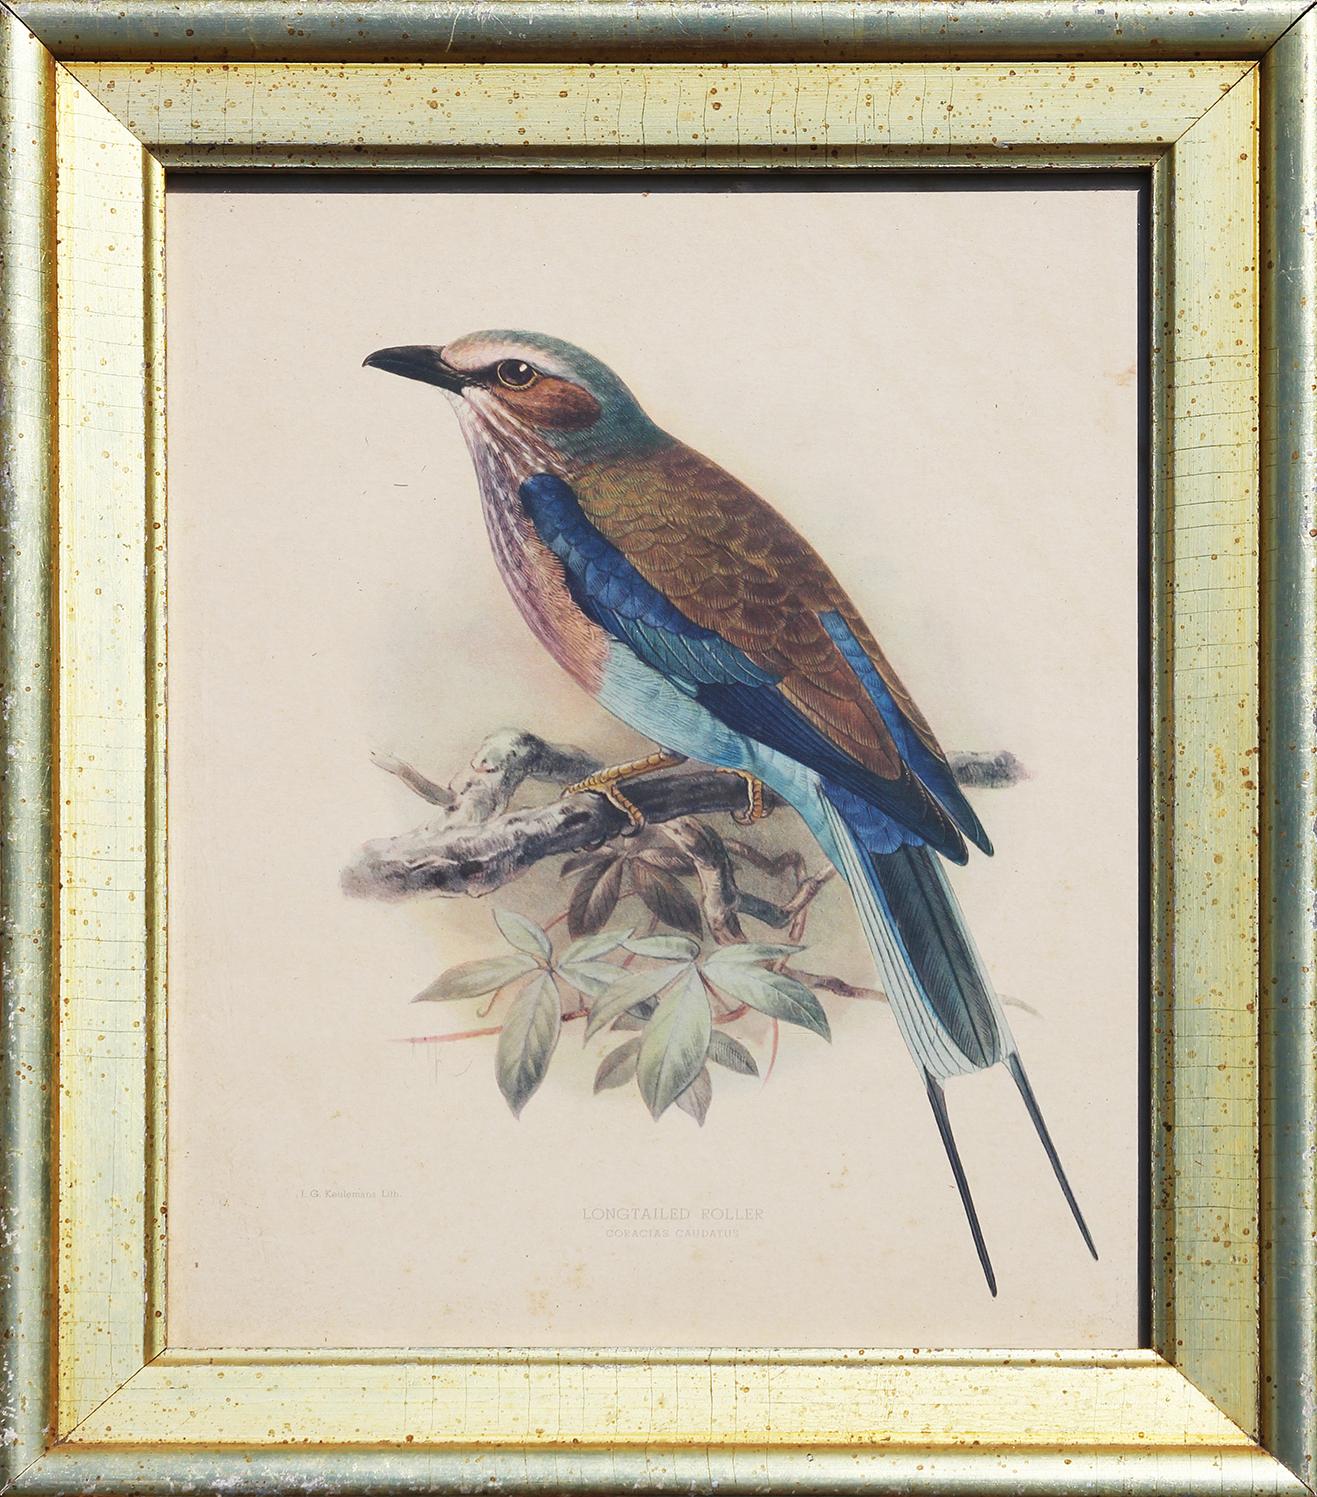 J.G. Keulemans Animal Print - "Longtailed Roller" Naturalistic Ornithological Lithograph of a Bird on a Branch